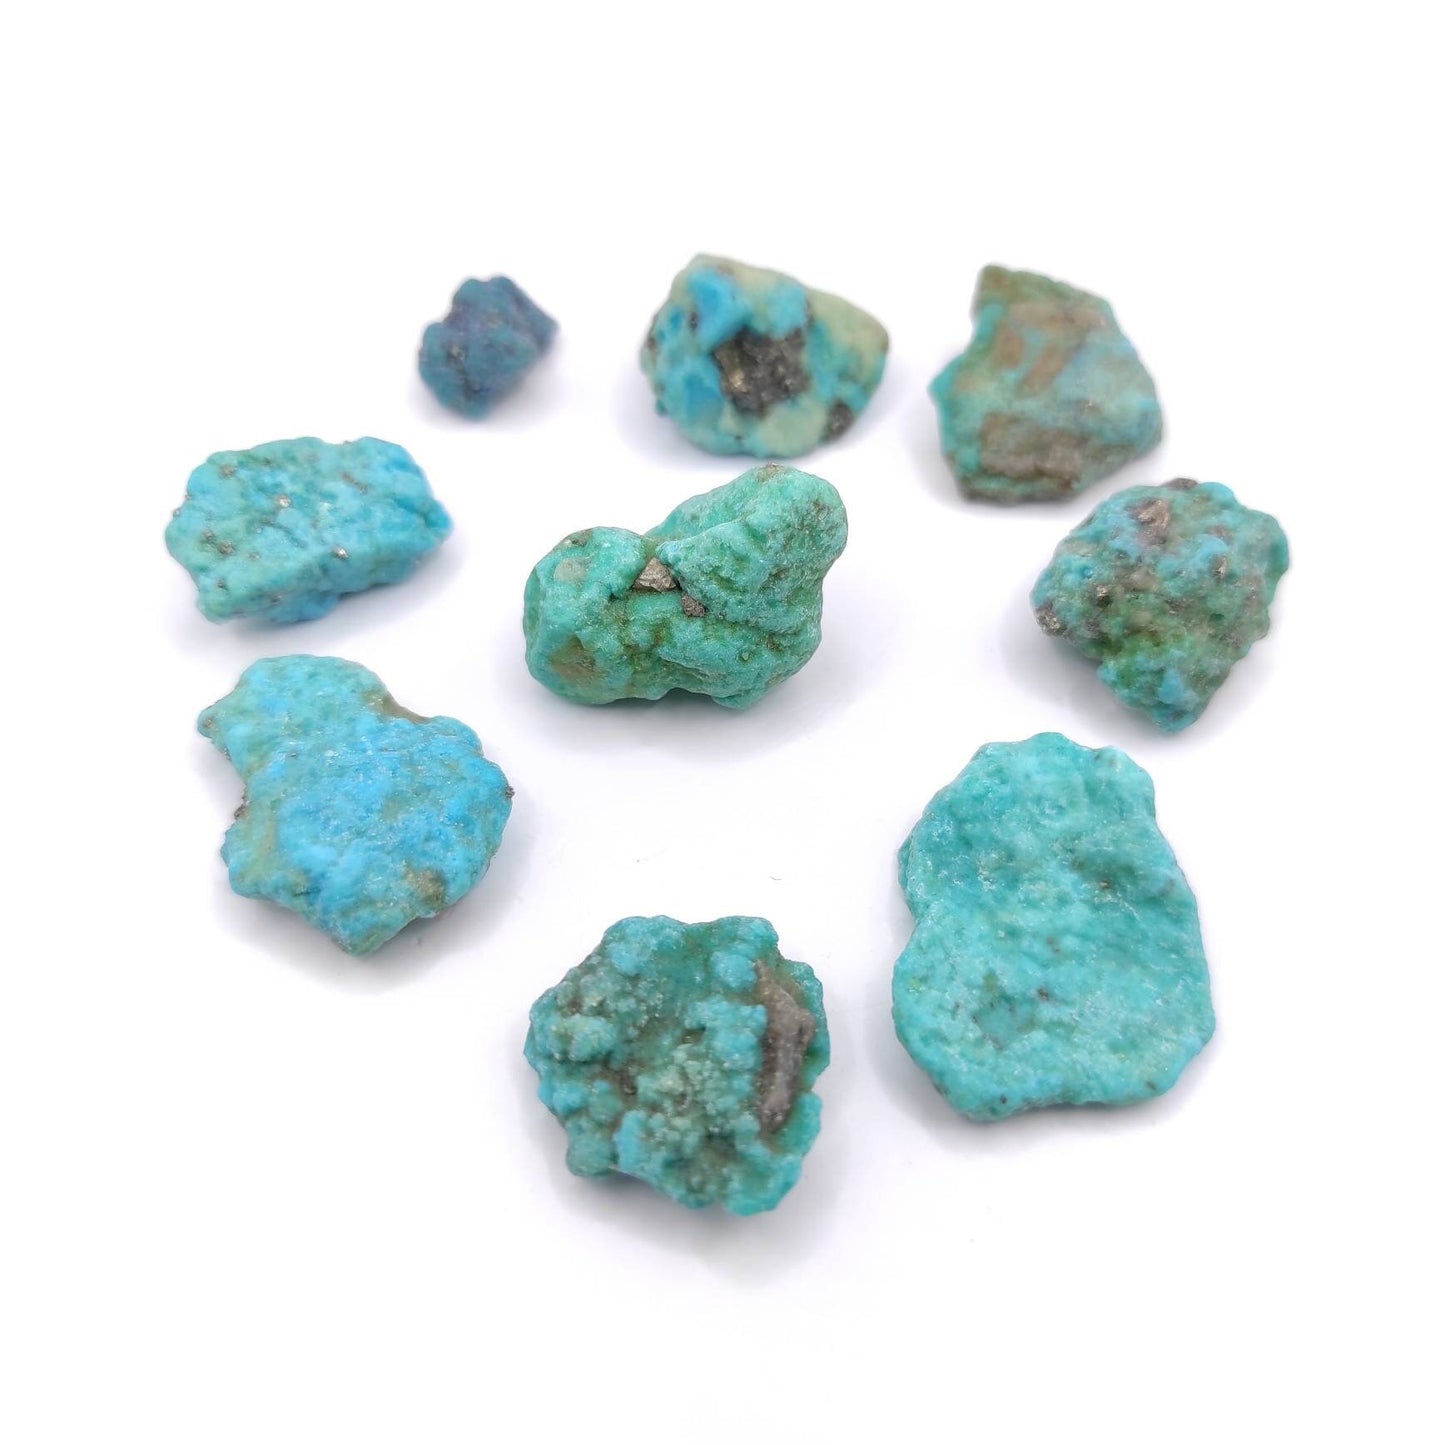 25.55g 9pcs Campitos Turquoise Lot Stabilized Turquoise Nuggets Sonora Mexico Blue Turquoise Genuine Turquoise with Pyrite Rough Turquoise